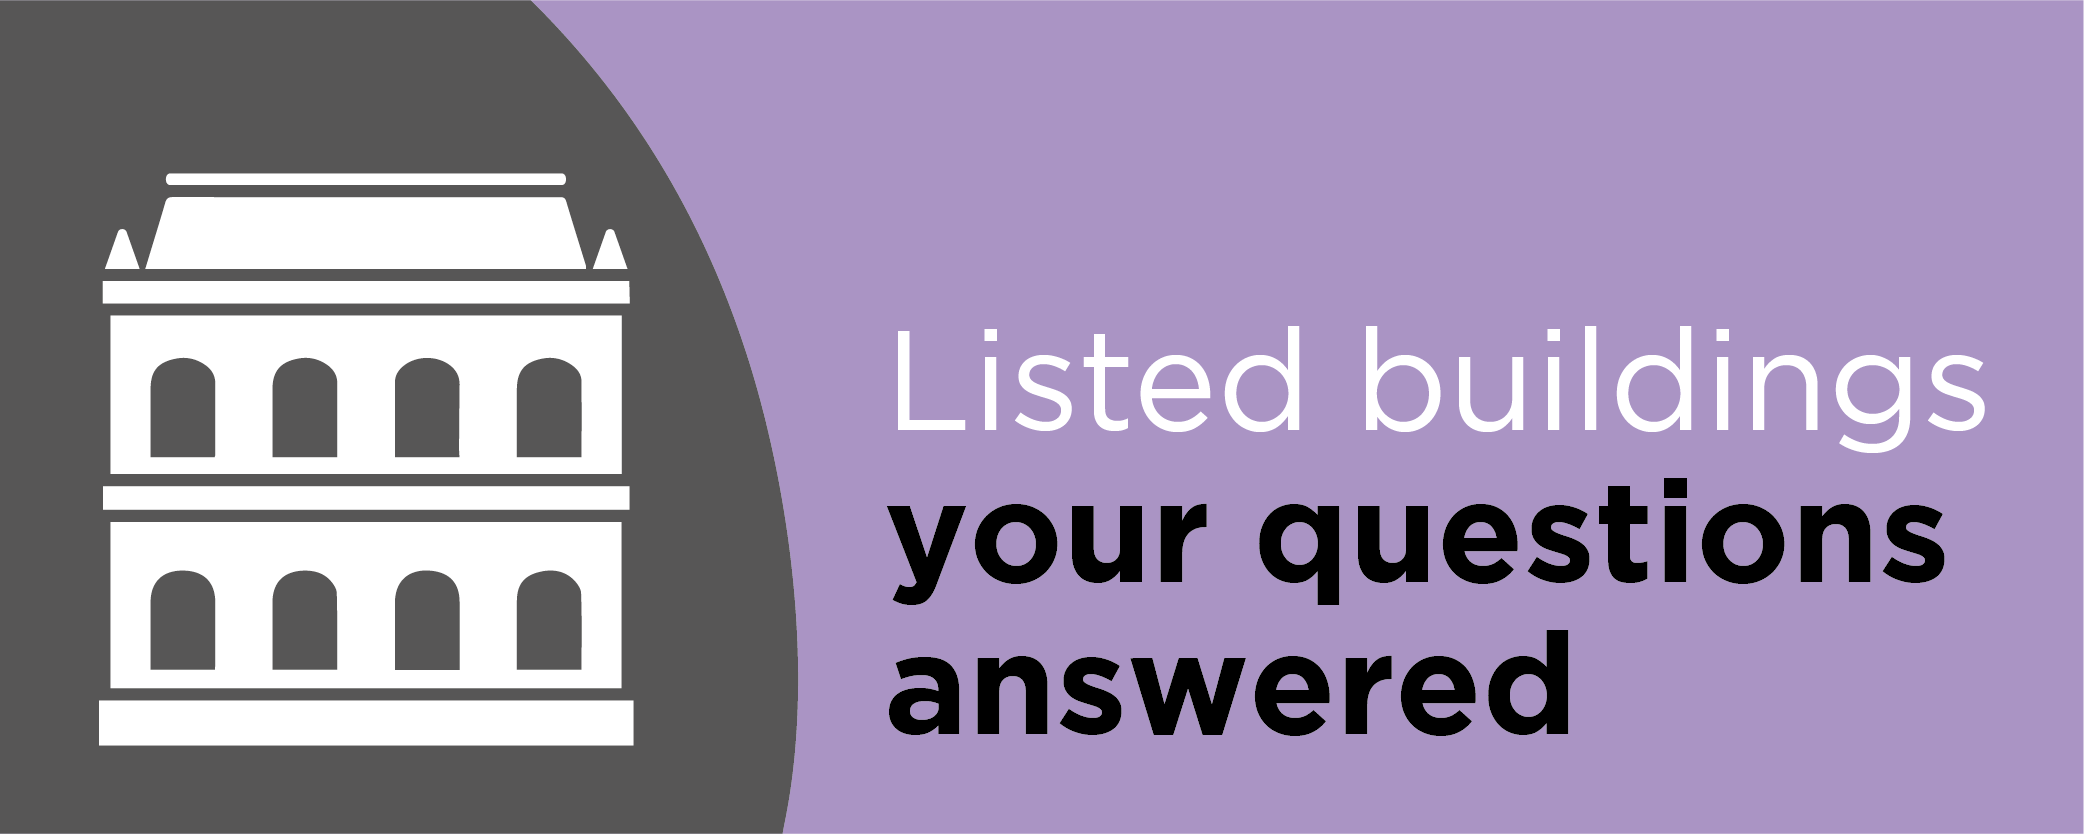 Listed buildings - your questions answered